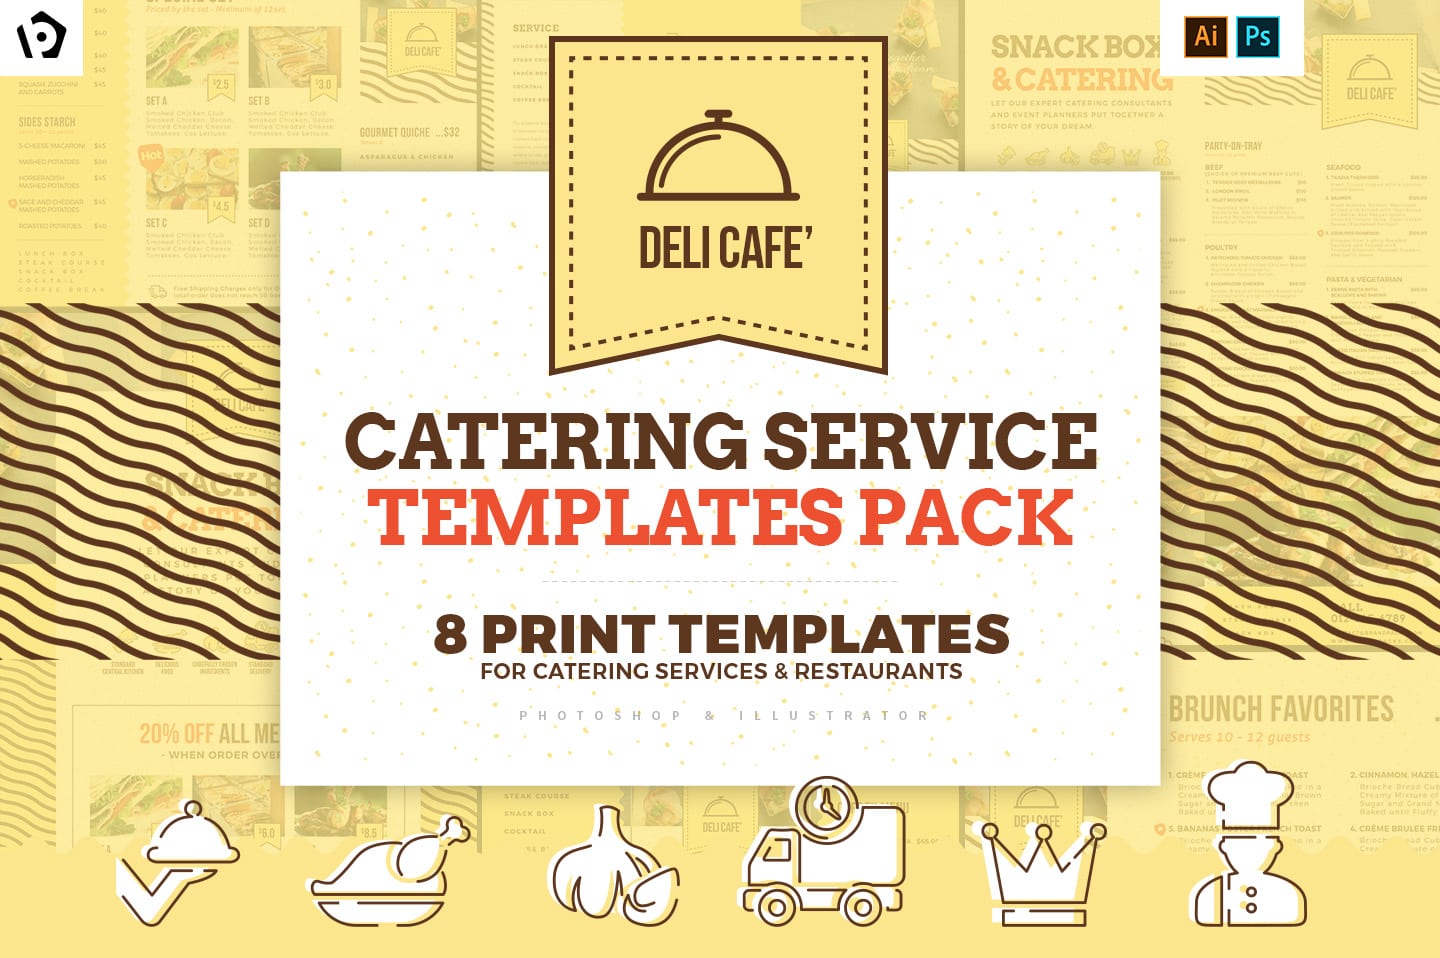 Catering Service Templates Pack